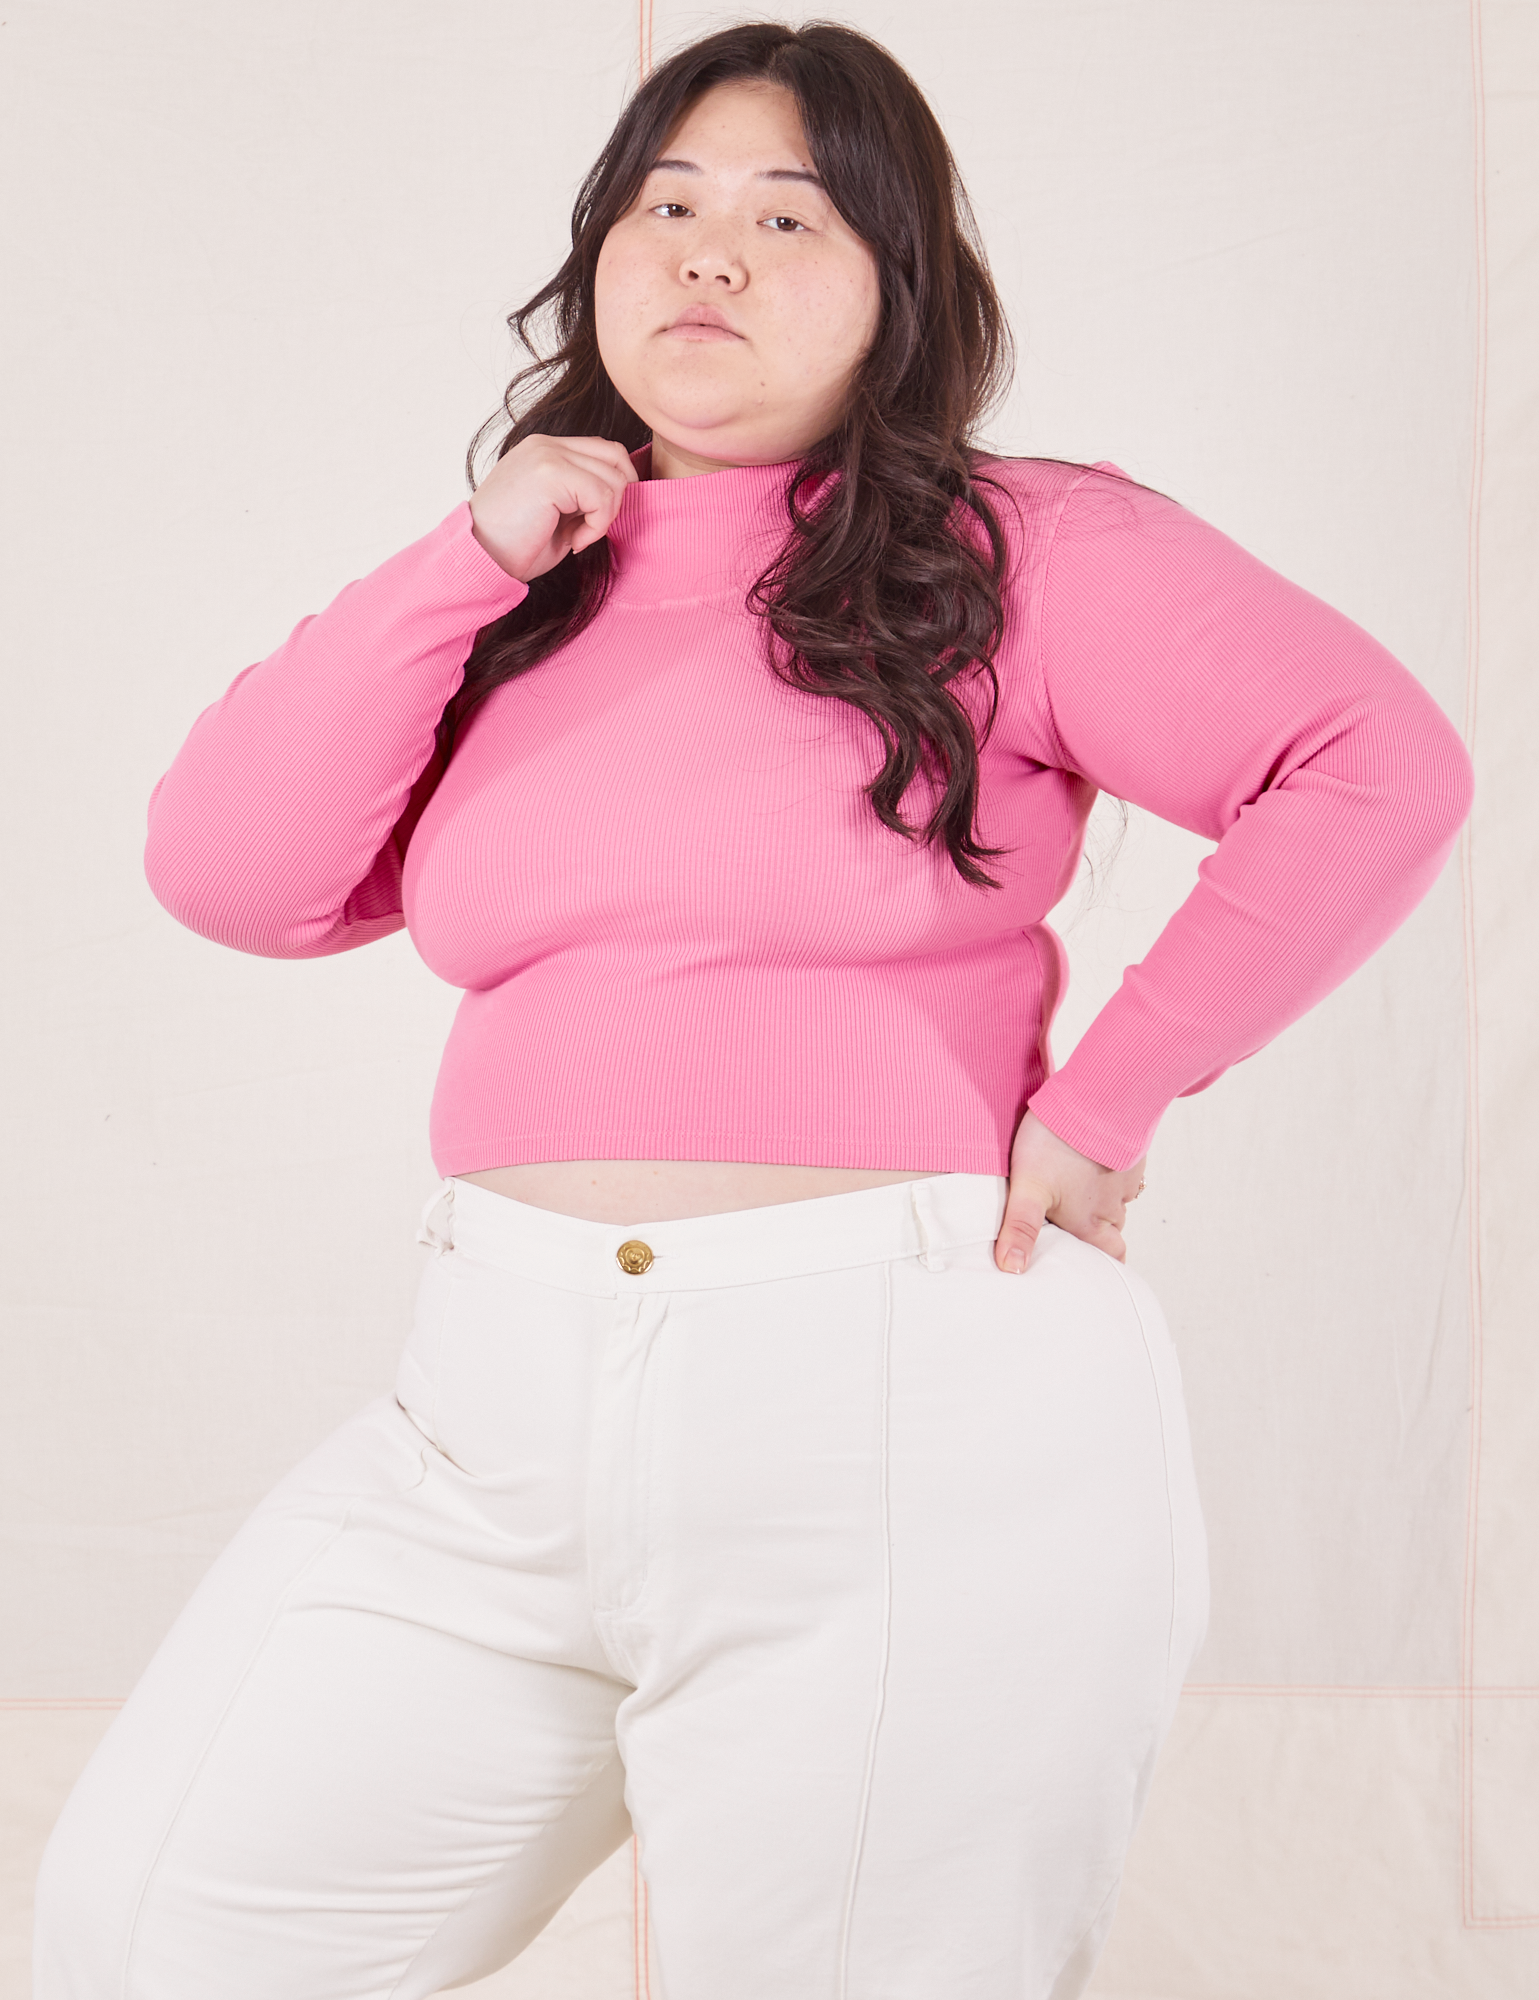 Ashley is wearing size L Essential Turtleneck in Bubblegum Pink paired with vintage off-white Western Pants